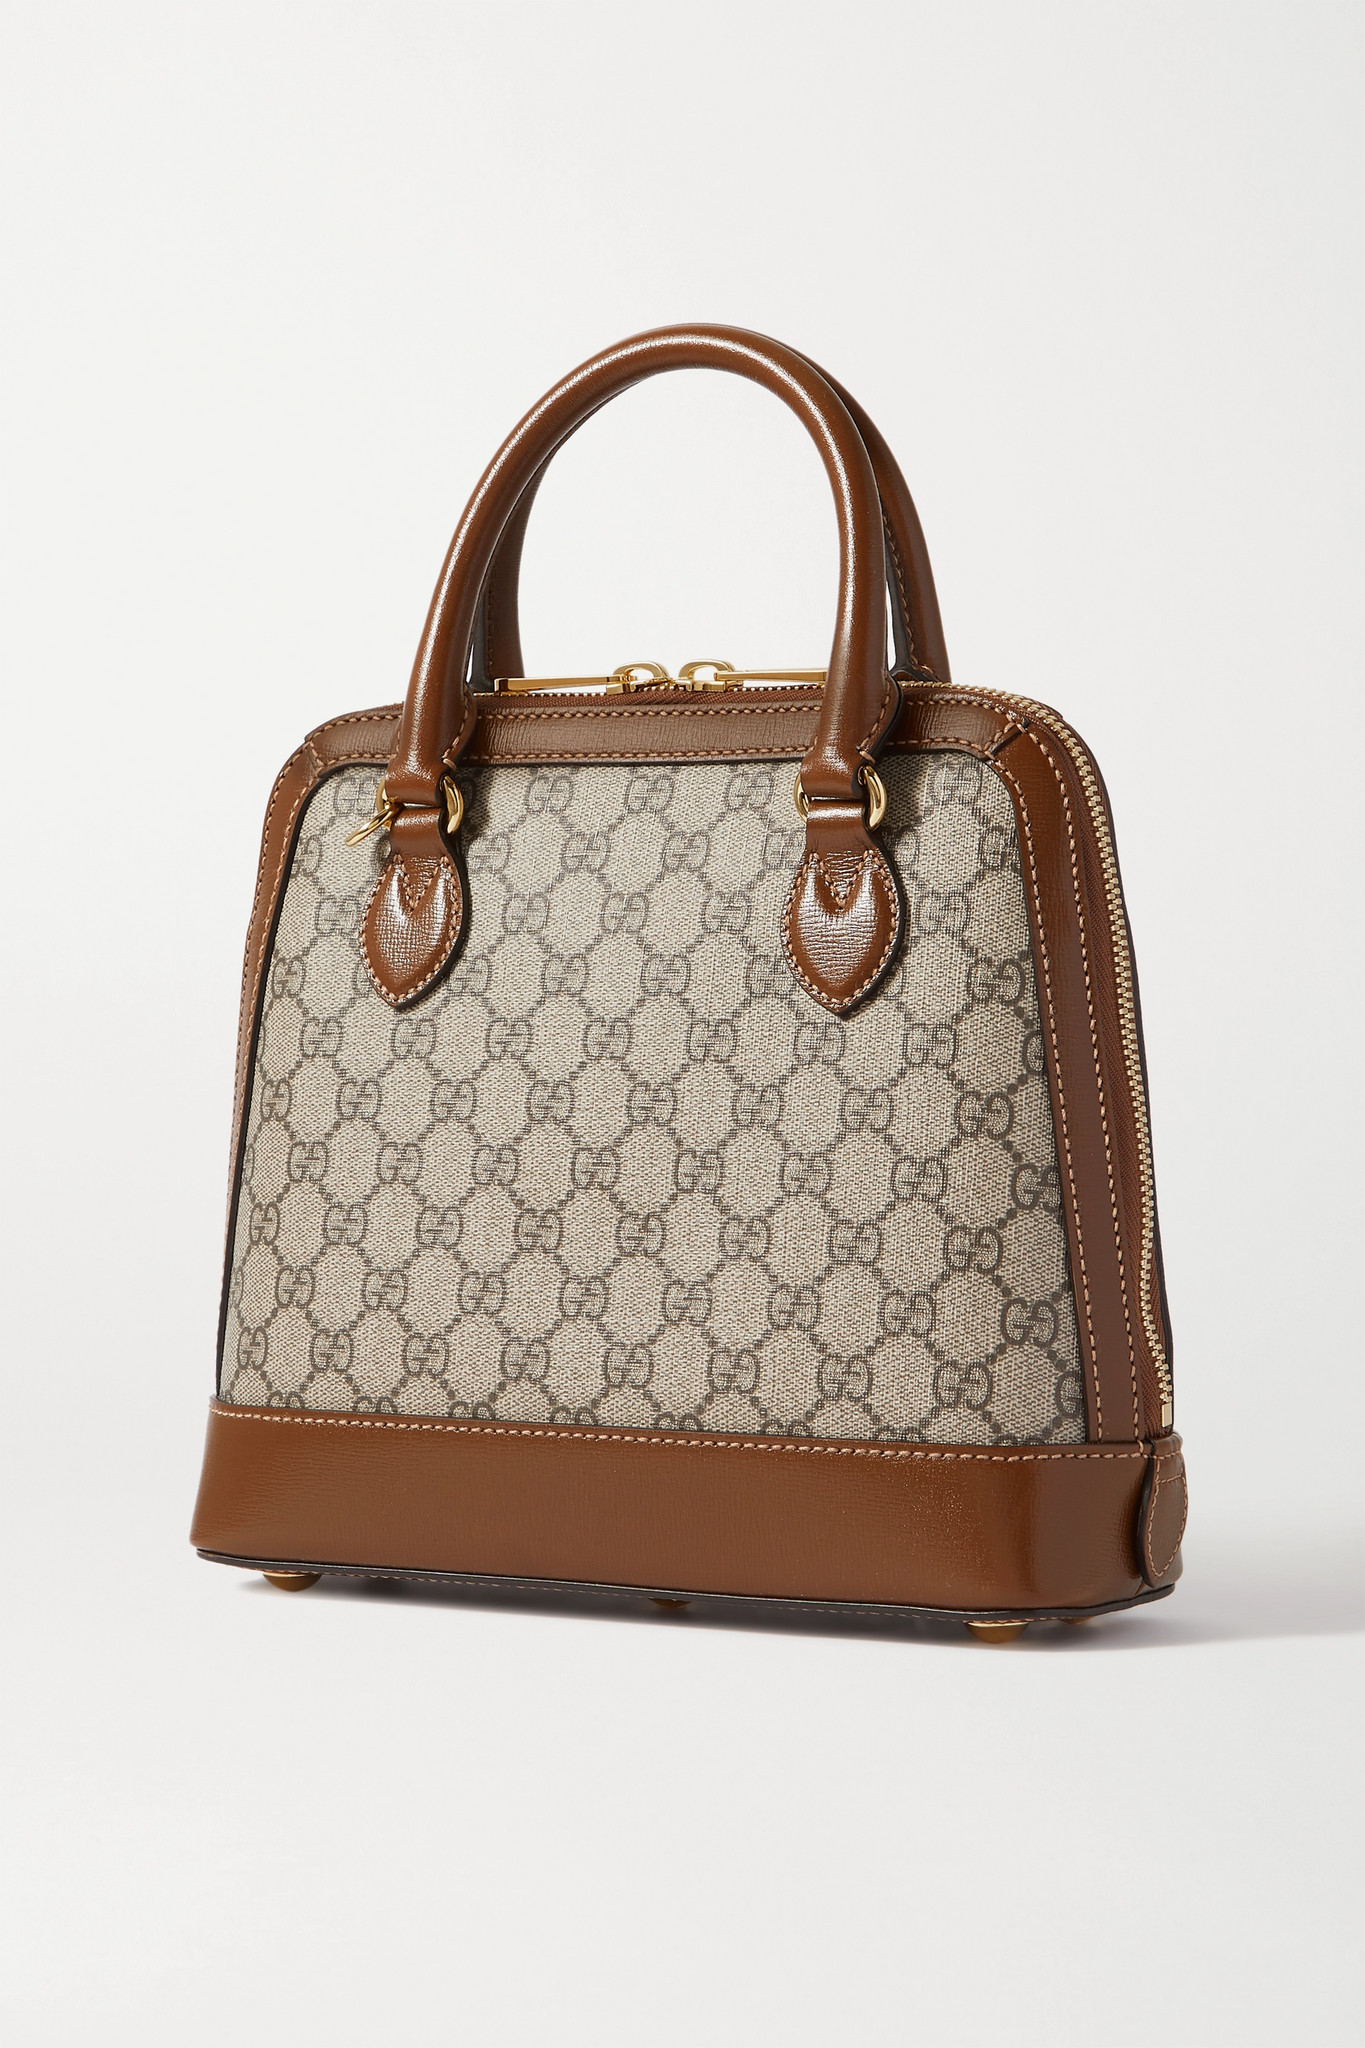 GUCCI Horsebit 1955 small leather-trimmed printed coated-canvas